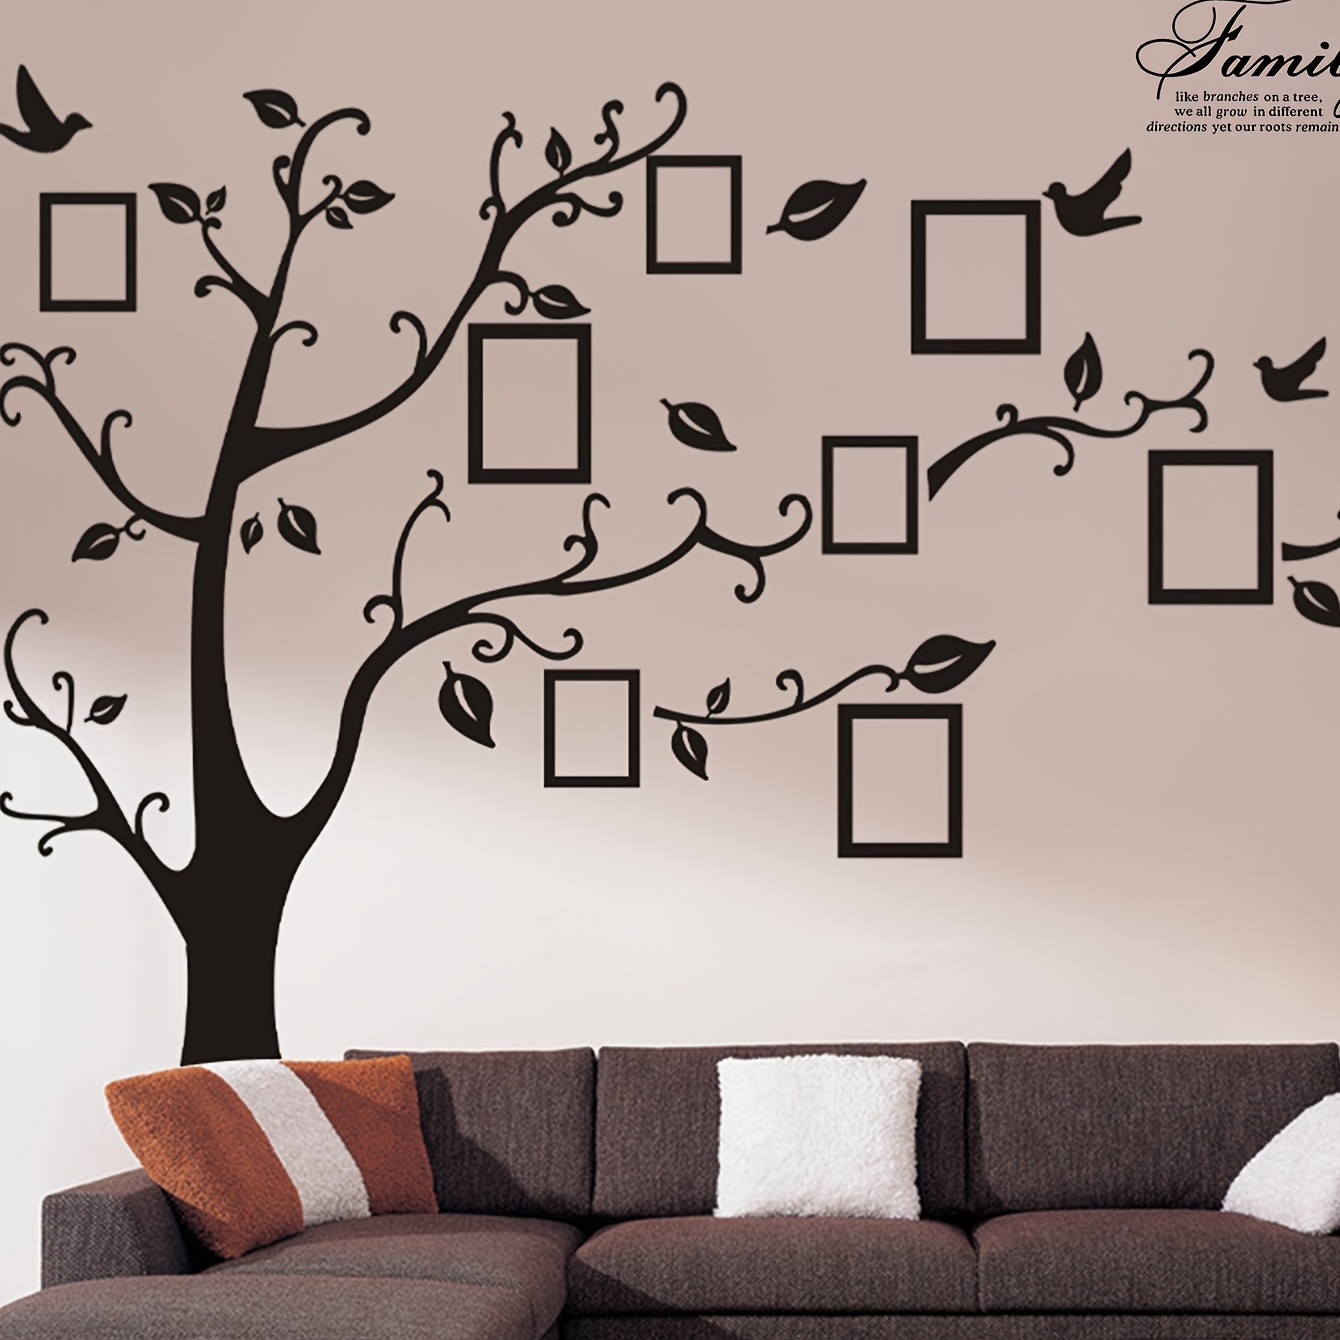 Modern Brassieres Ladies Fashion Wall Decal  Print decals, Wall decals,  Removable wall stickers